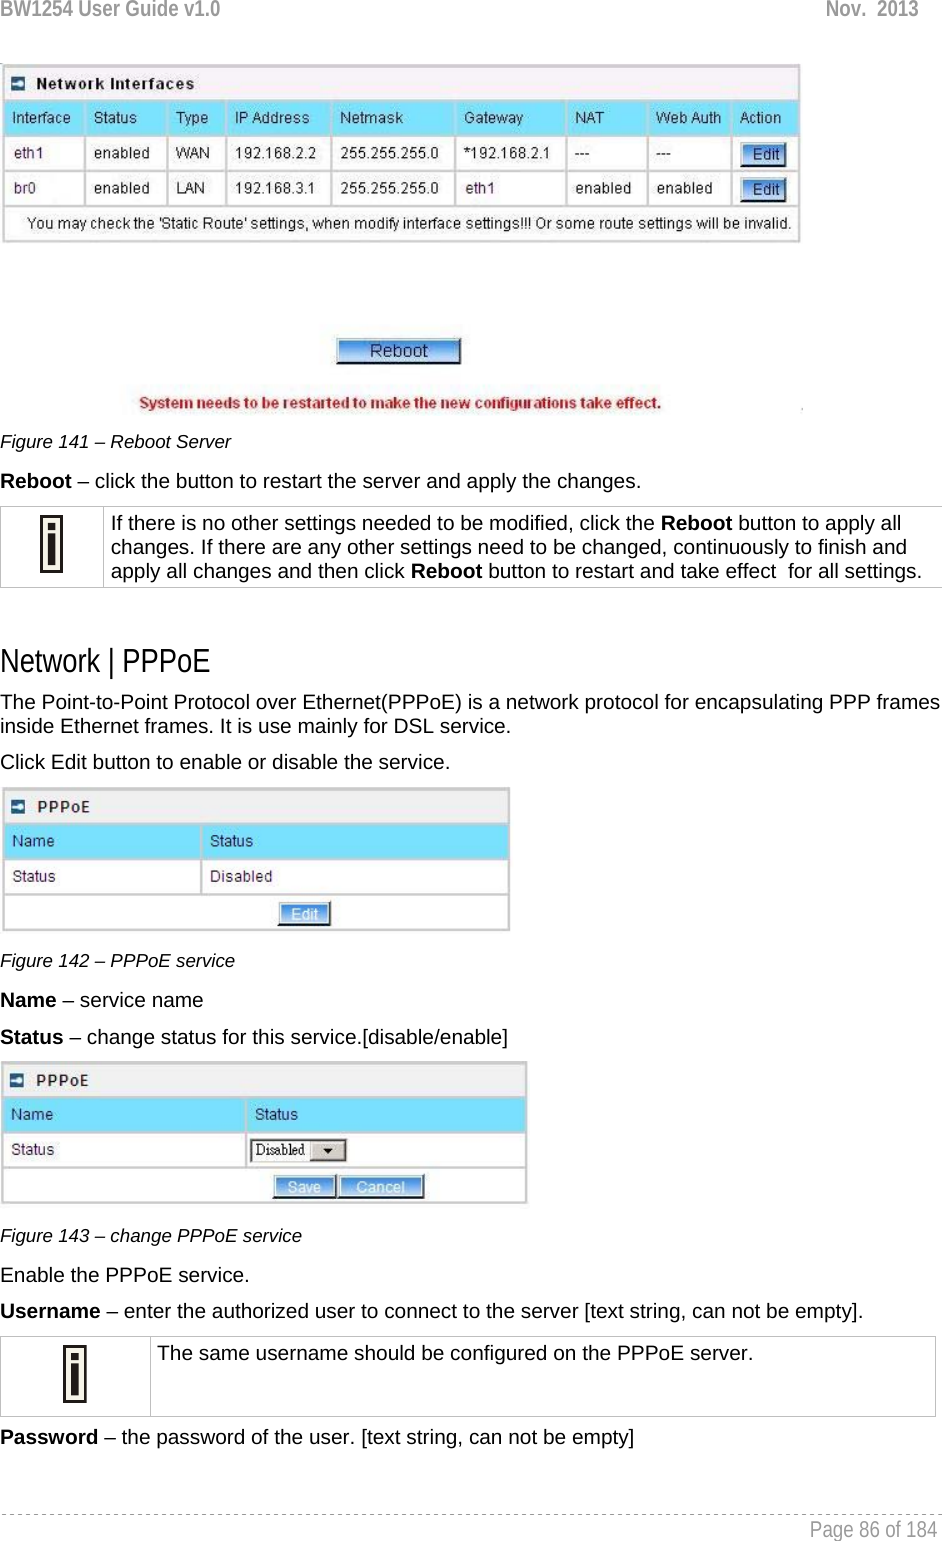 BW1254 User Guide v1.0  Nov.  2013     Page 86 of 184    Figure 141 – Reboot Server Reboot – click the button to restart the server and apply the changes.  If there is no other settings needed to be modified, click the Reboot button to apply all changes. If there are any other settings need to be changed, continuously to finish and apply all changes and then click Reboot button to restart and take effect  for all settings.  Network | PPPoE The Point-to-Point Protocol over Ethernet(PPPoE) is a network protocol for encapsulating PPP frames inside Ethernet frames. It is use mainly for DSL service. Click Edit button to enable or disable the service.  Figure 142 – PPPoE service Name – service name Status – change status for this service.[disable/enable]  Figure 143 – change PPPoE service Enable the PPPoE service. Username – enter the authorized user to connect to the server [text string, can not be empty].  The same username should be configured on the PPPoE server. Password – the password of the user. [text string, can not be empty]  